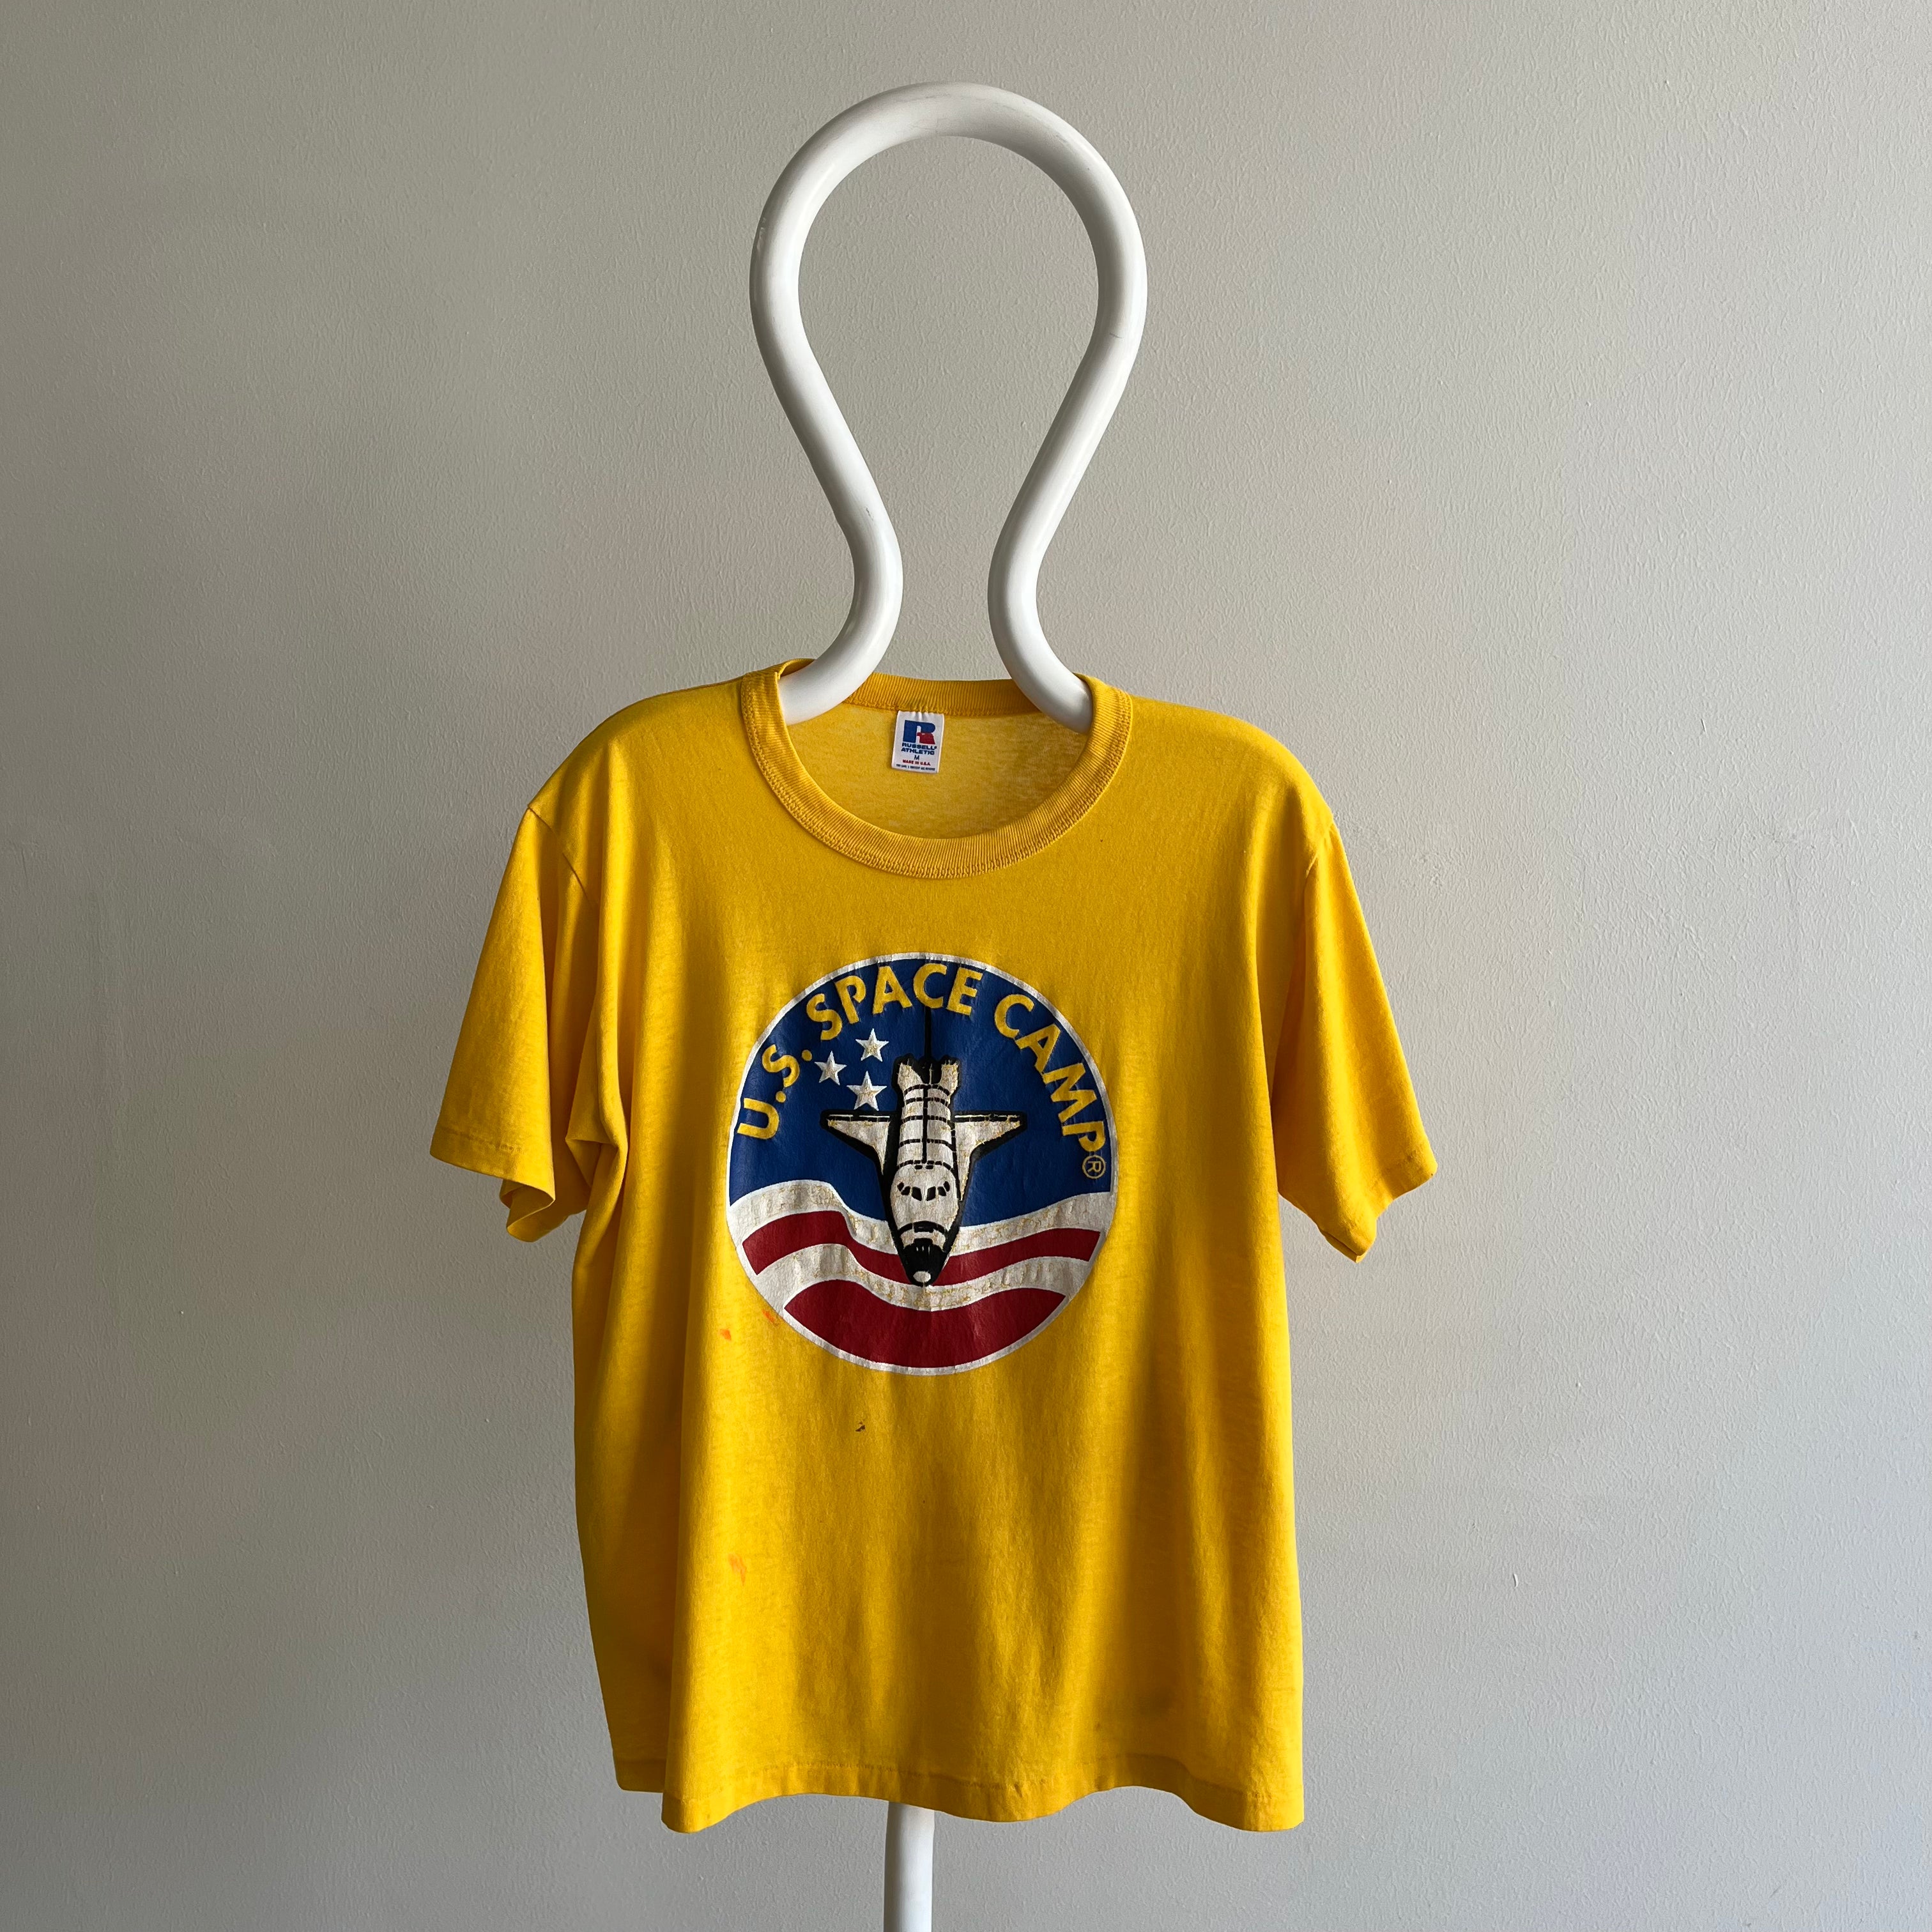 1982ish NASA Space Camp T-Shirt by Russell